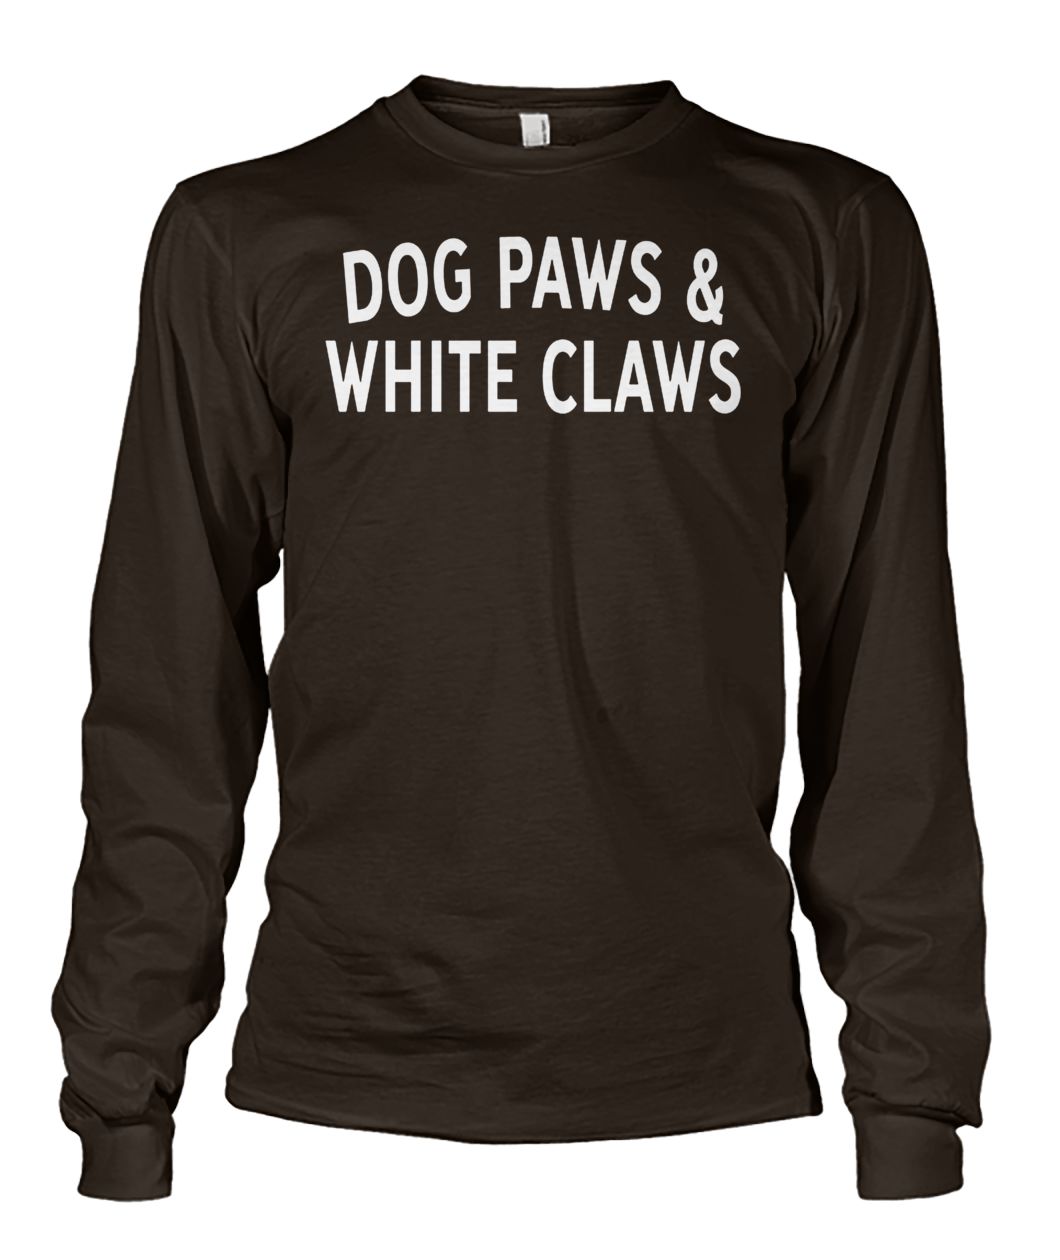 Dog paws and white claws unisex long sleeve